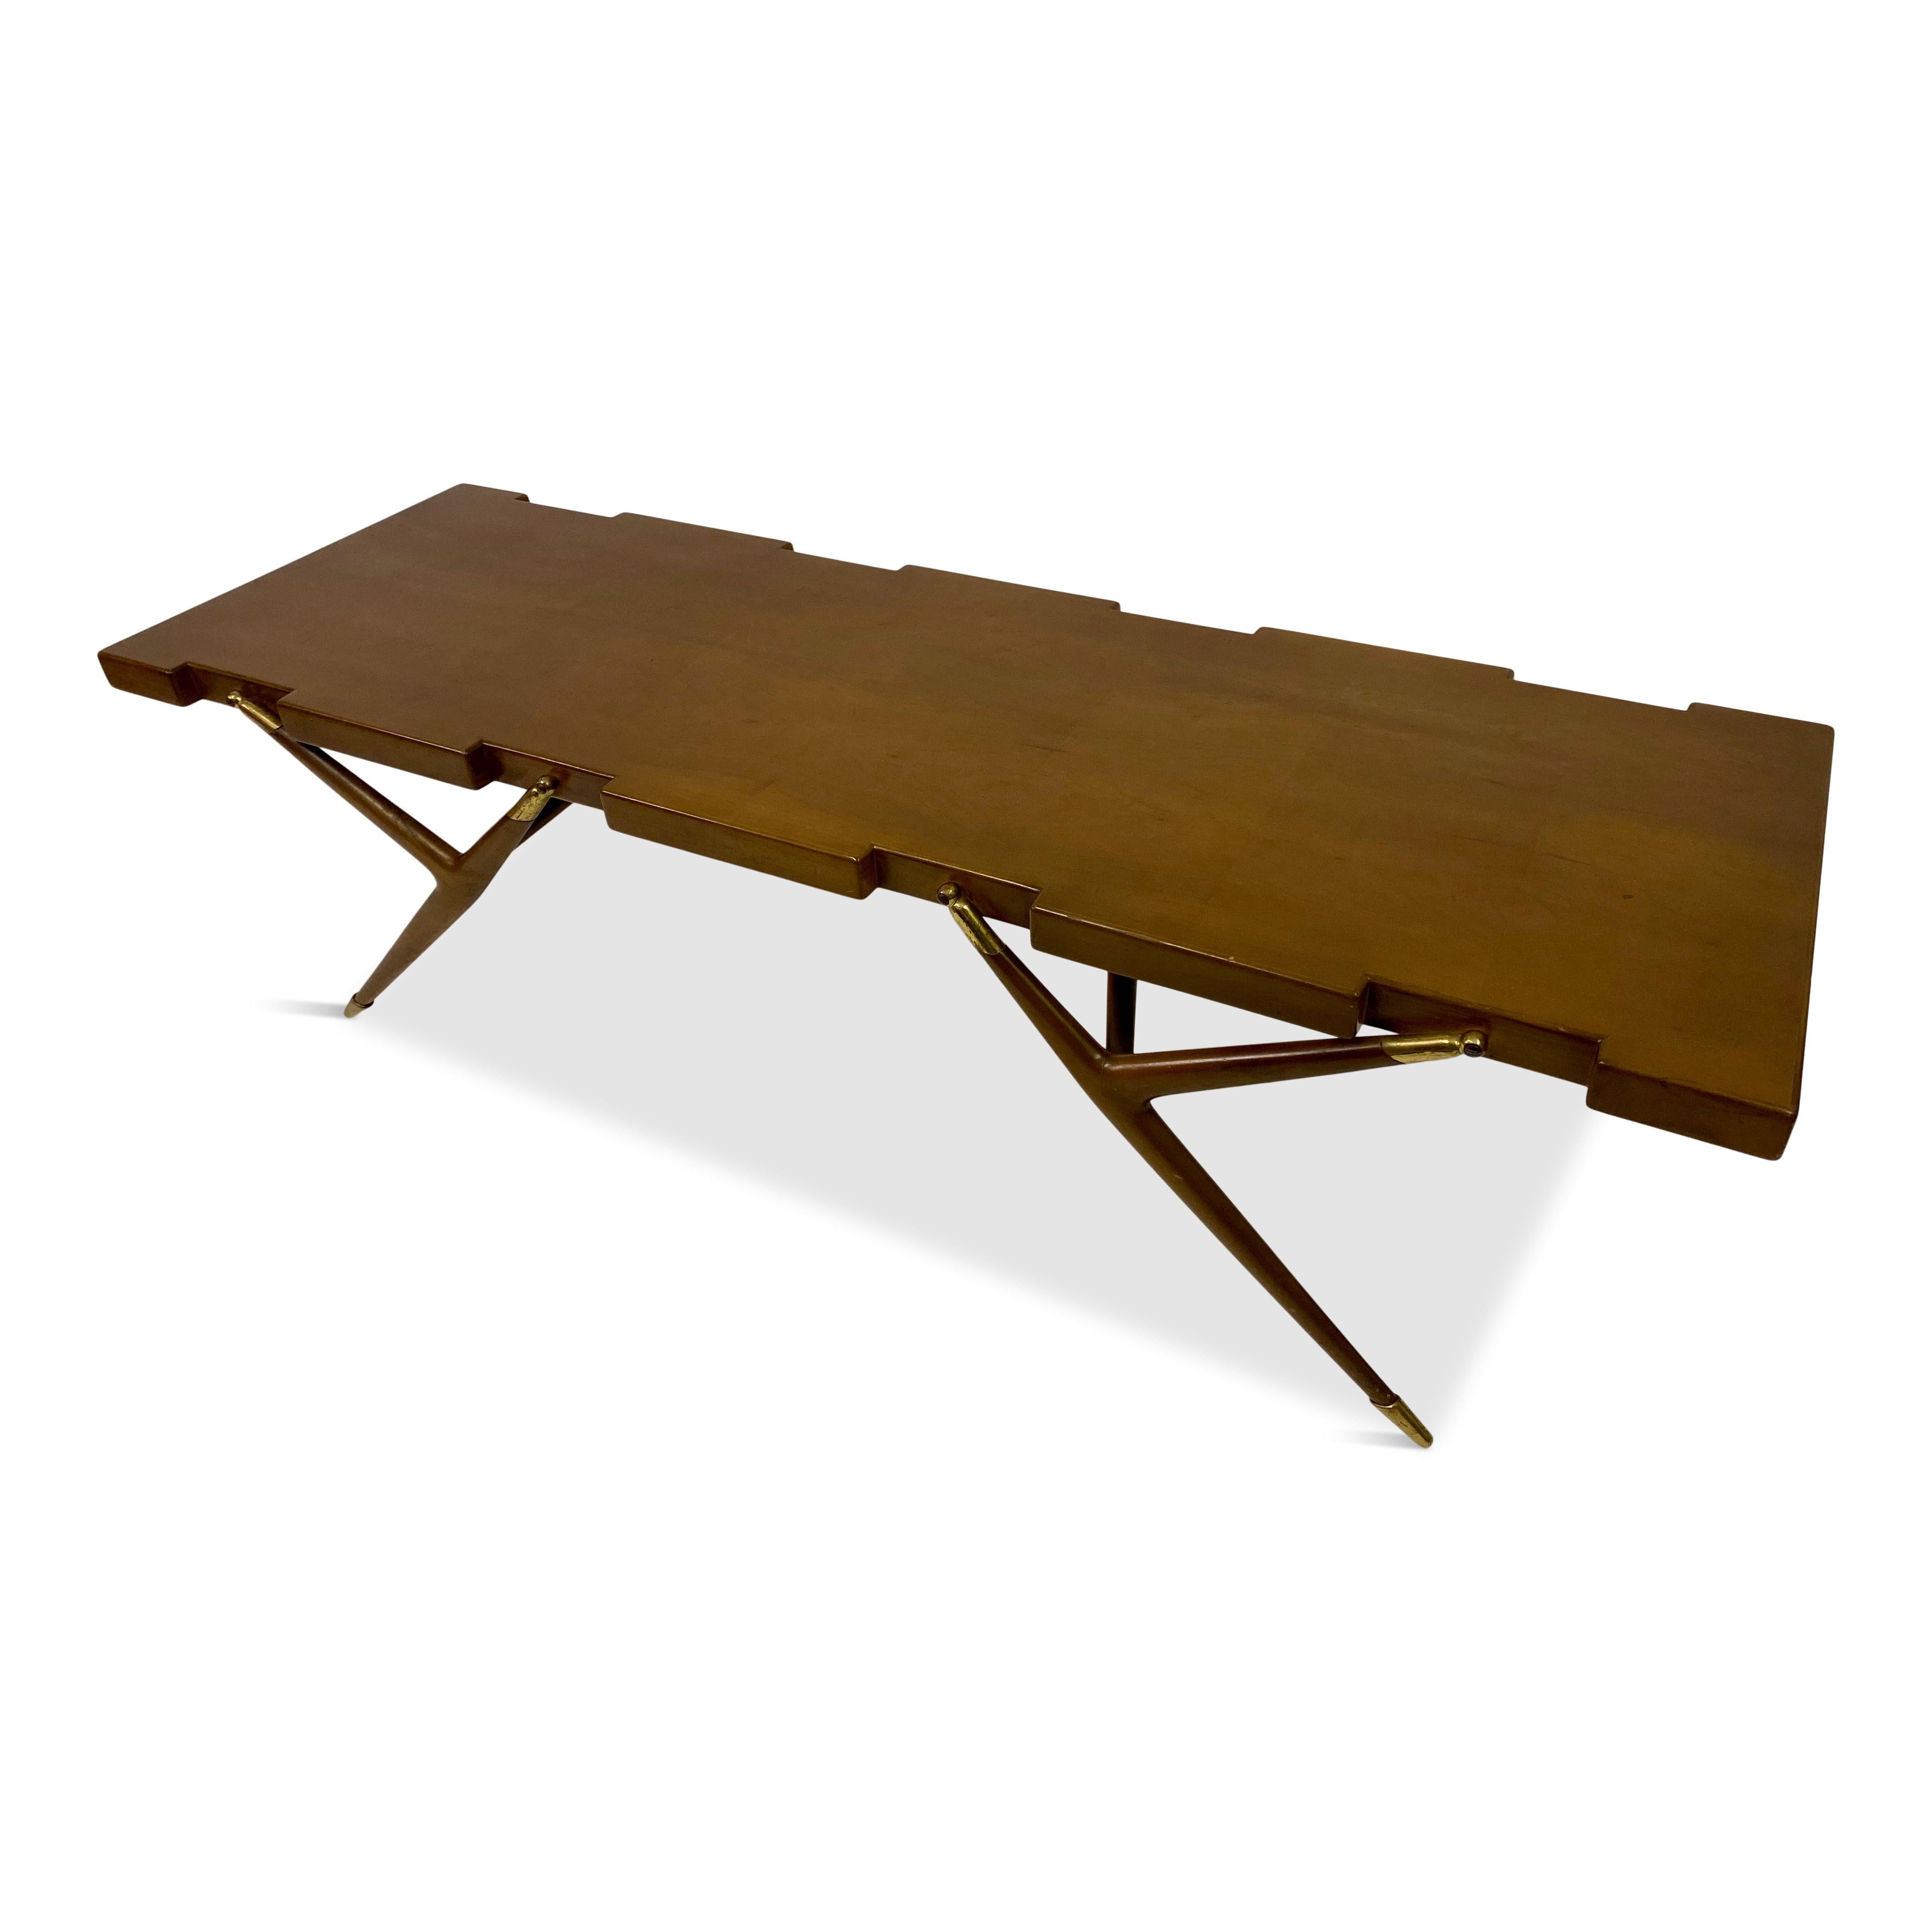 Coffee table

By Ico Parisi

Model Number 1116

Manufactured by Fratelli Rizzi, Intimiano, Italy

Retailed by Singer & Sons, New York 

Made exclusively for the American market

Walnut veneered wood, walnut and brass

Applied Singer & Sons